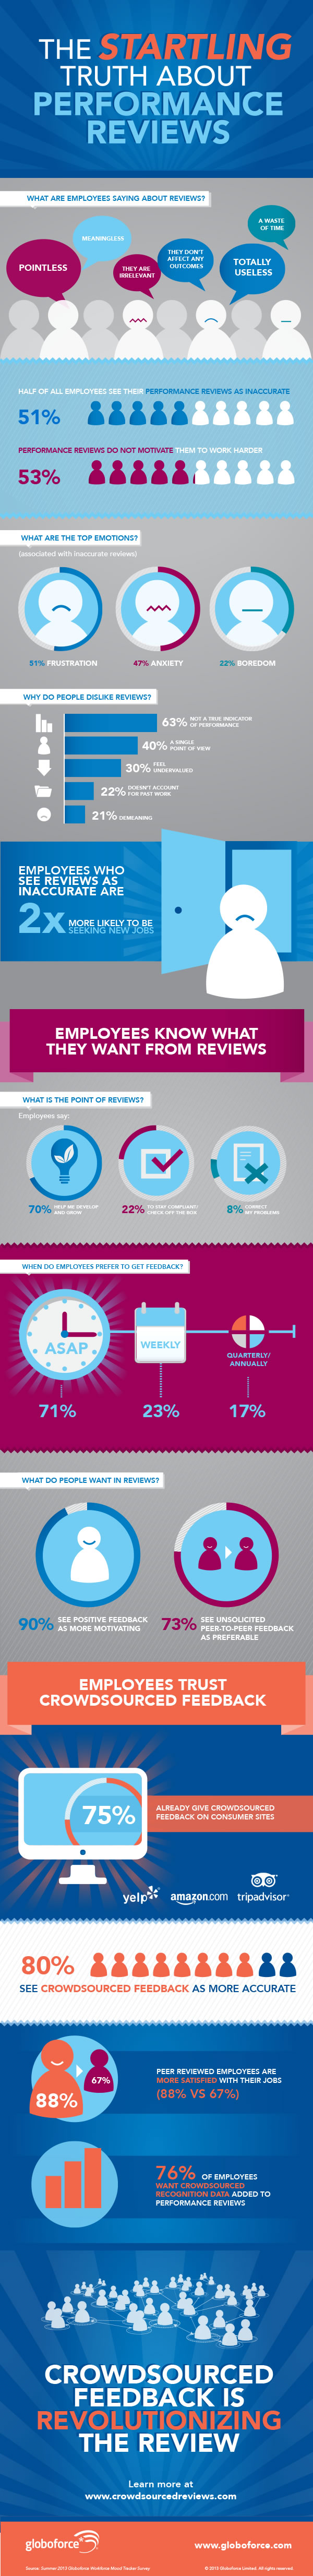 infographic-employee-reviews